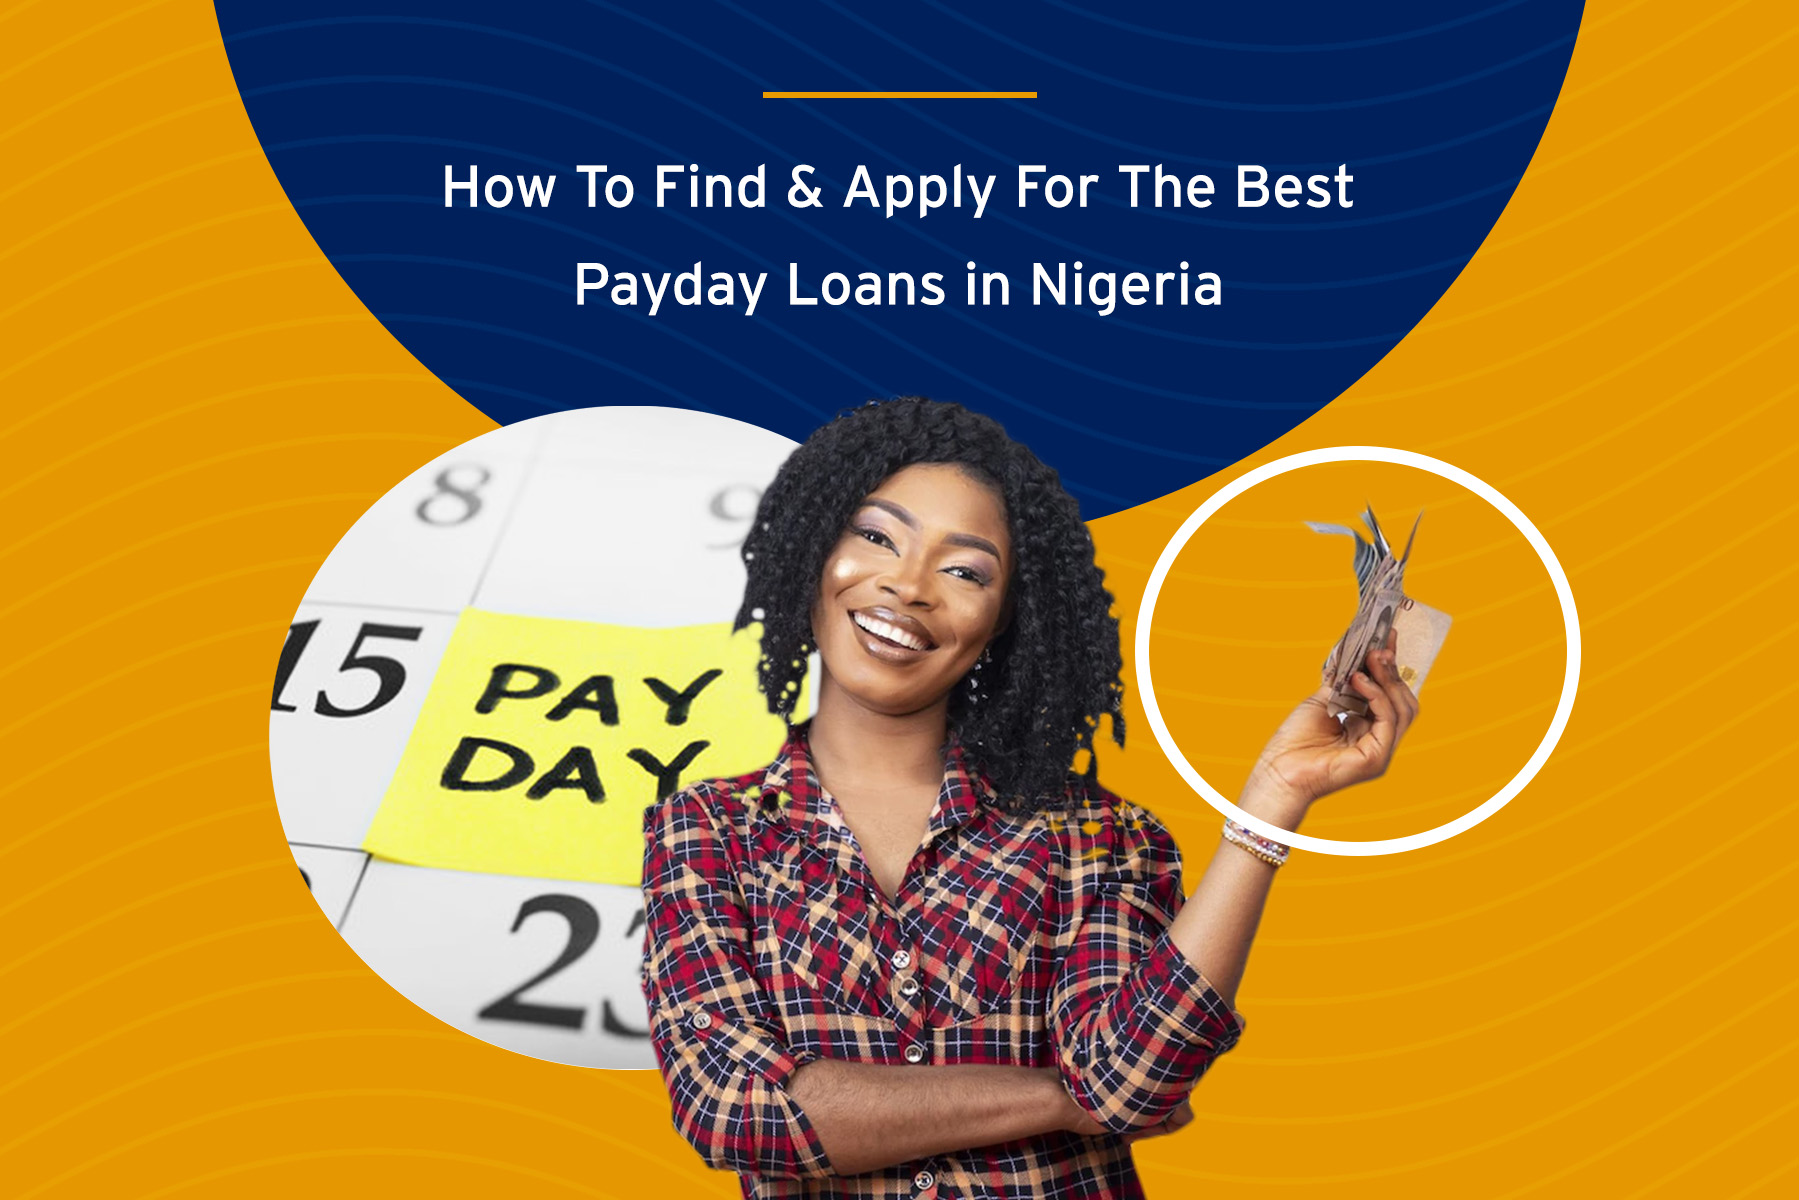 How To Find and Apply For The Best Payday Loans In Nigeria